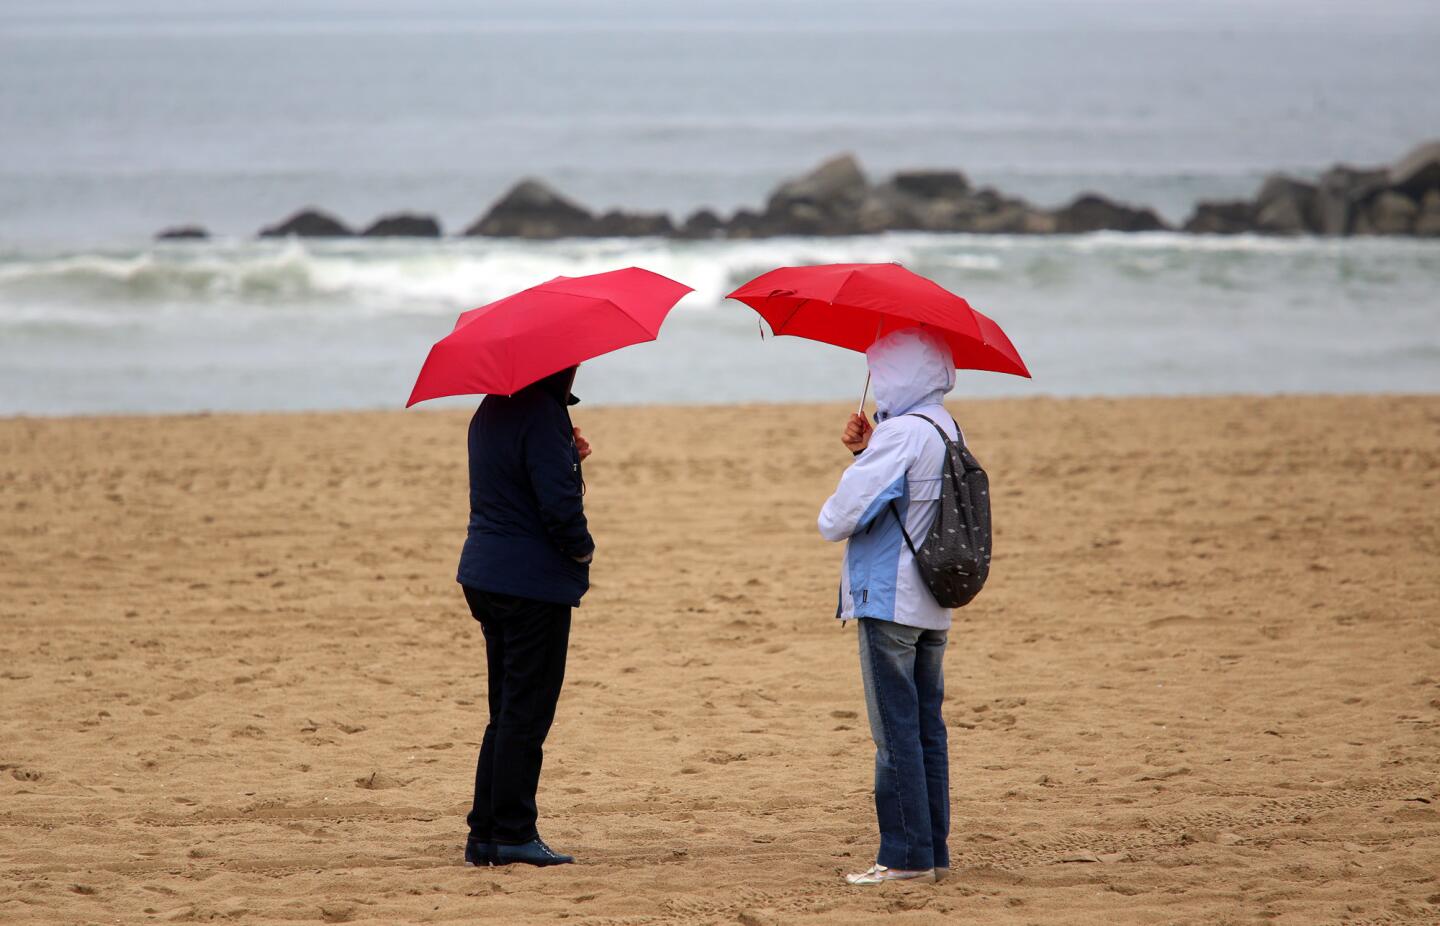 Rosa Angela Paradiso, left, and her sister Maria Paradiso, from Italy, spend a moment in the rain on Venice Beach.